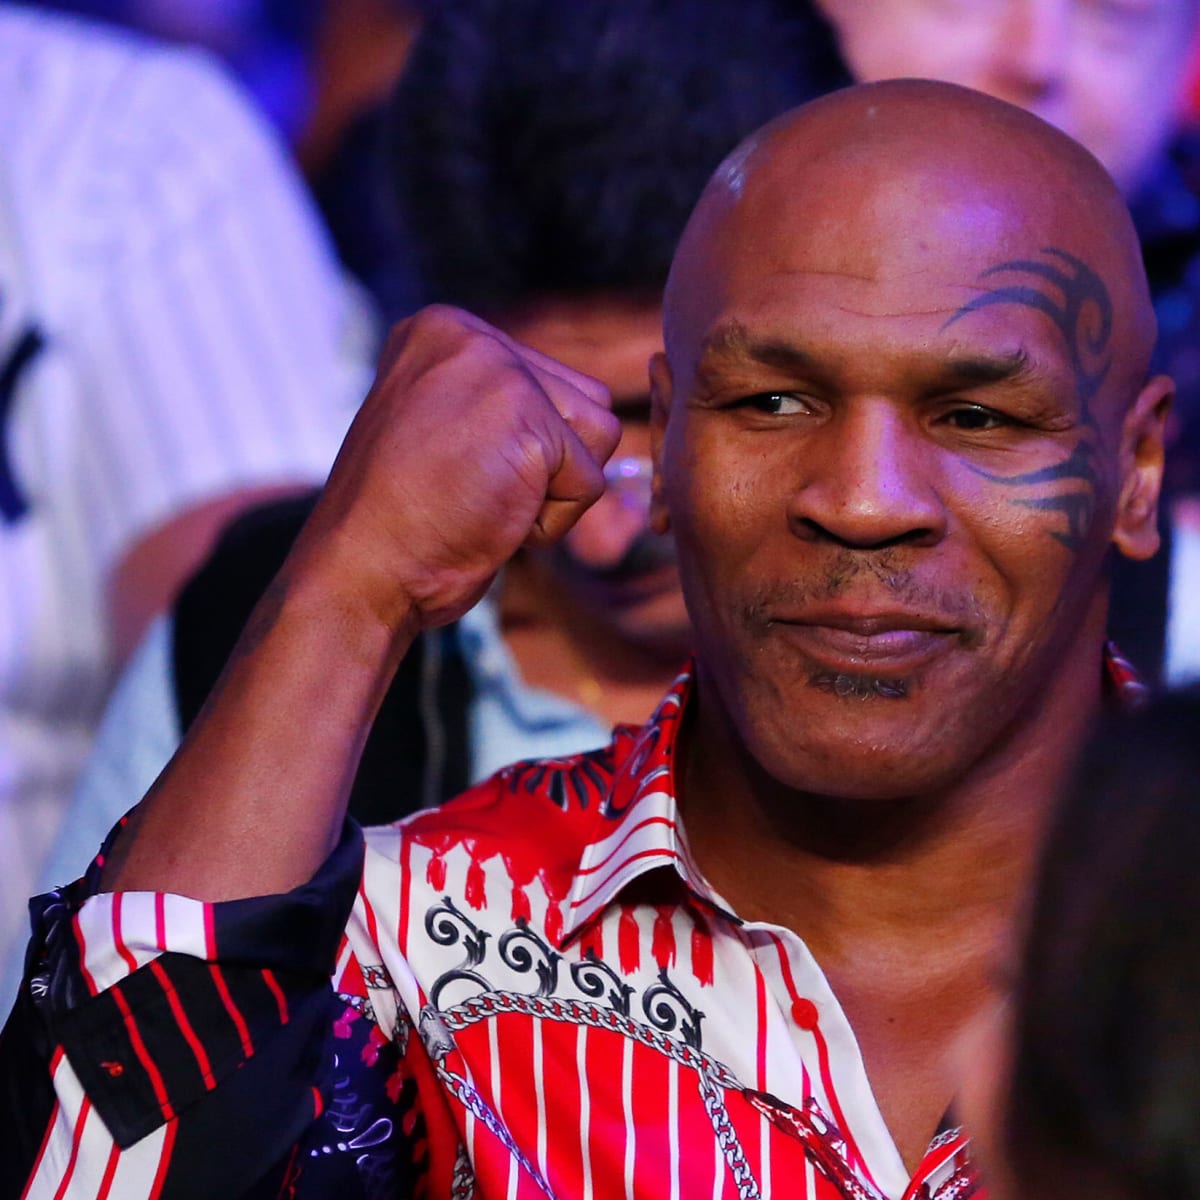 Mike Tyson Goes Viral At US Open Sports World Reacts